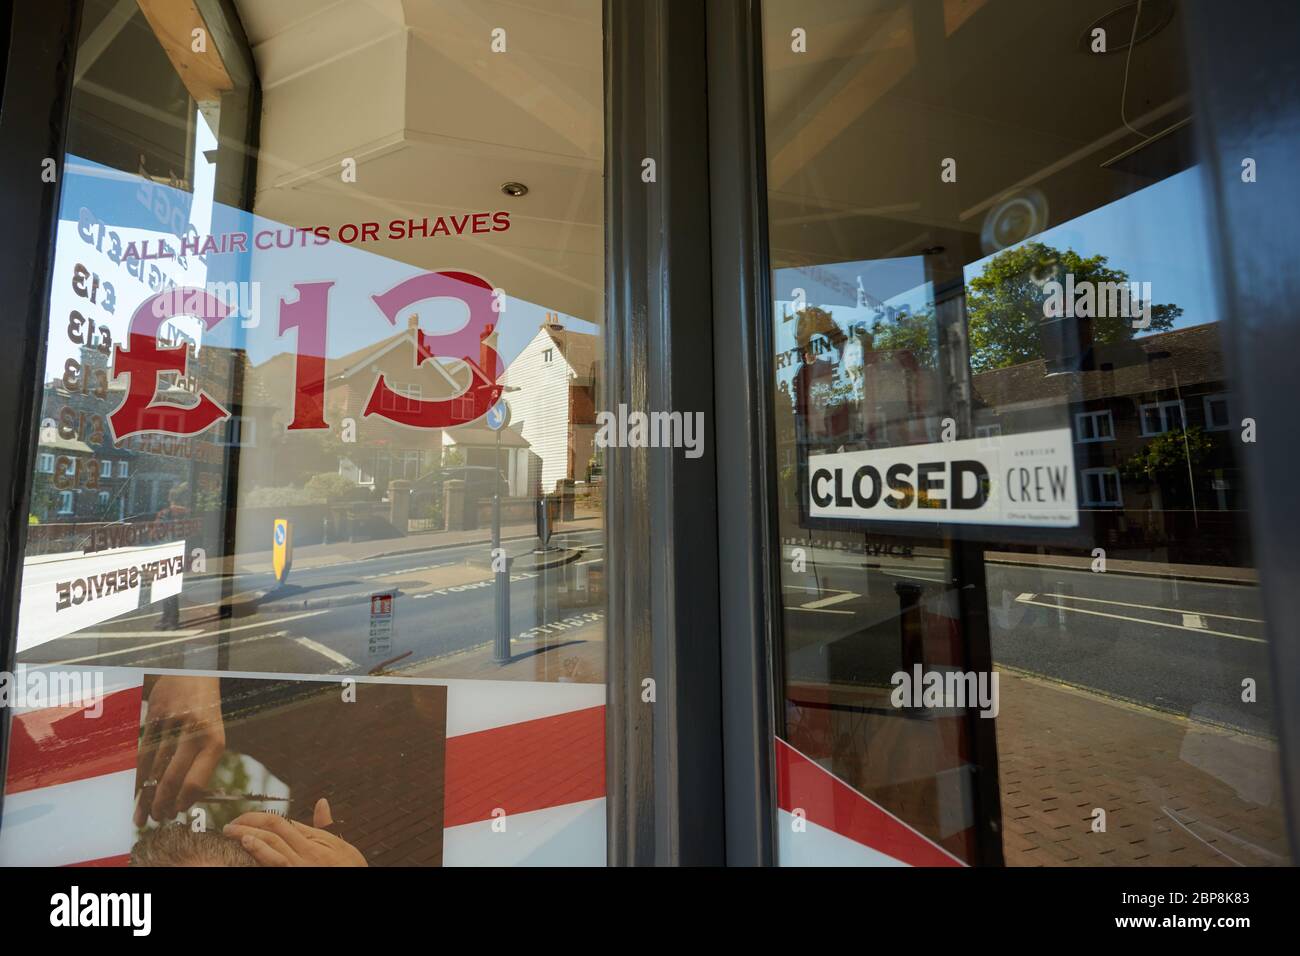 Photograph of closed sign in the window of a Barber's shop in Bexley. Taken during the week of the easing of the Coronavirus lockdown in the UK. Stock Photo